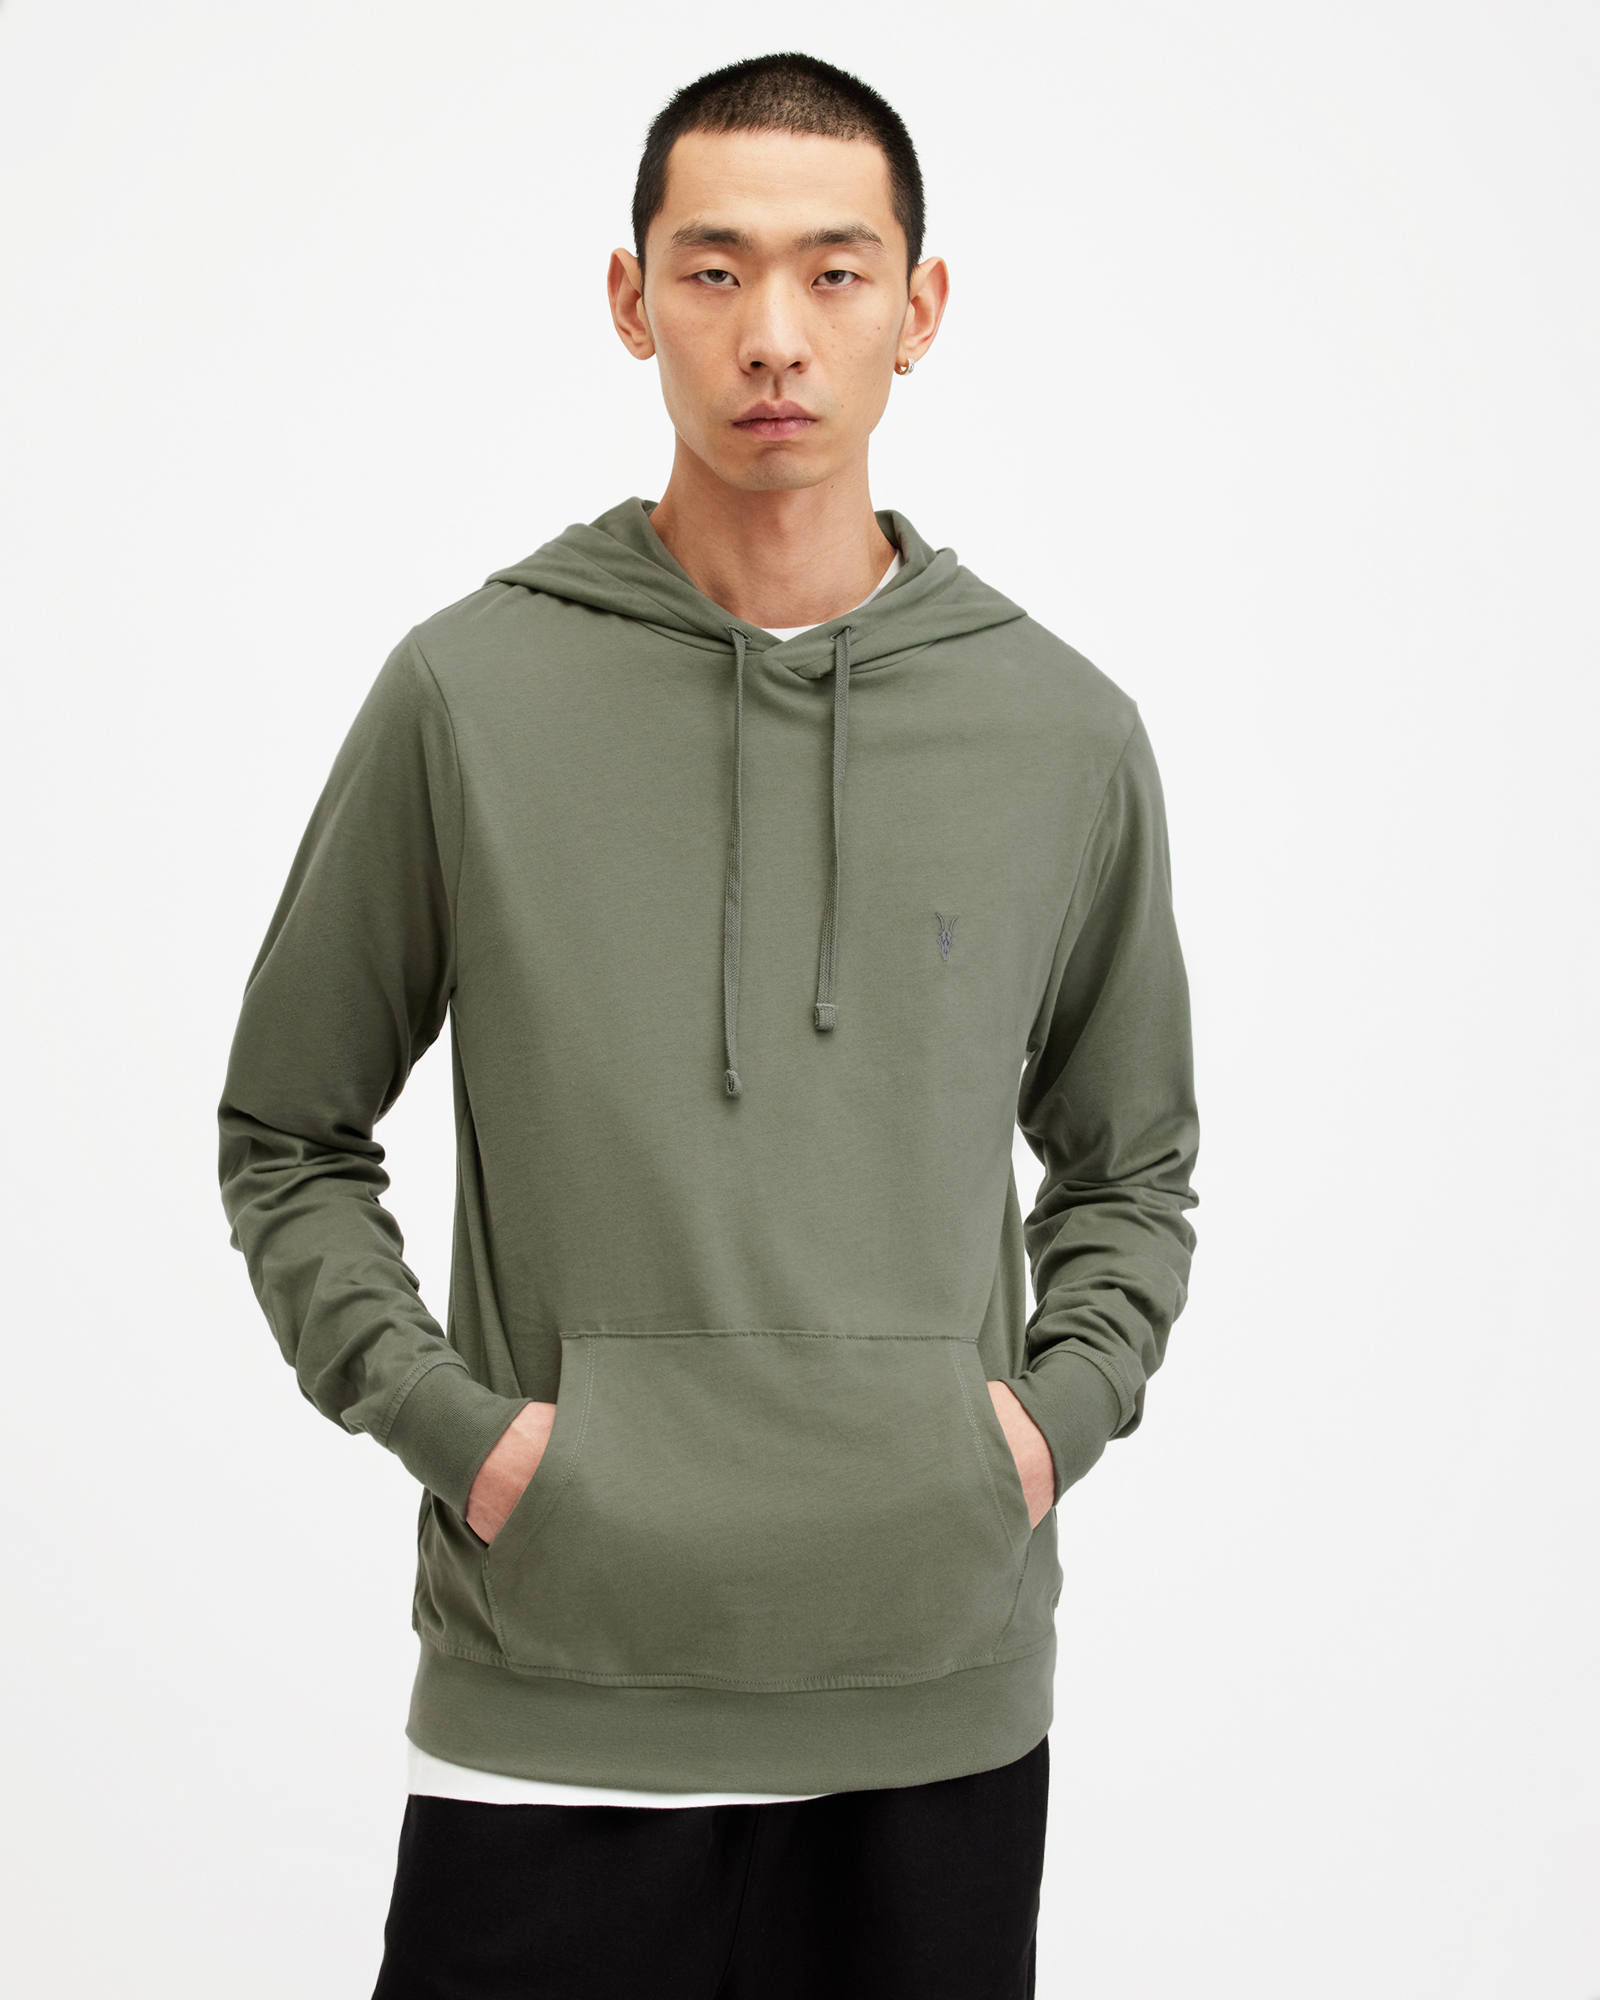 AllSaints Brace Pullover Brushed Cotton Hoodie,, VALLEY GREEN